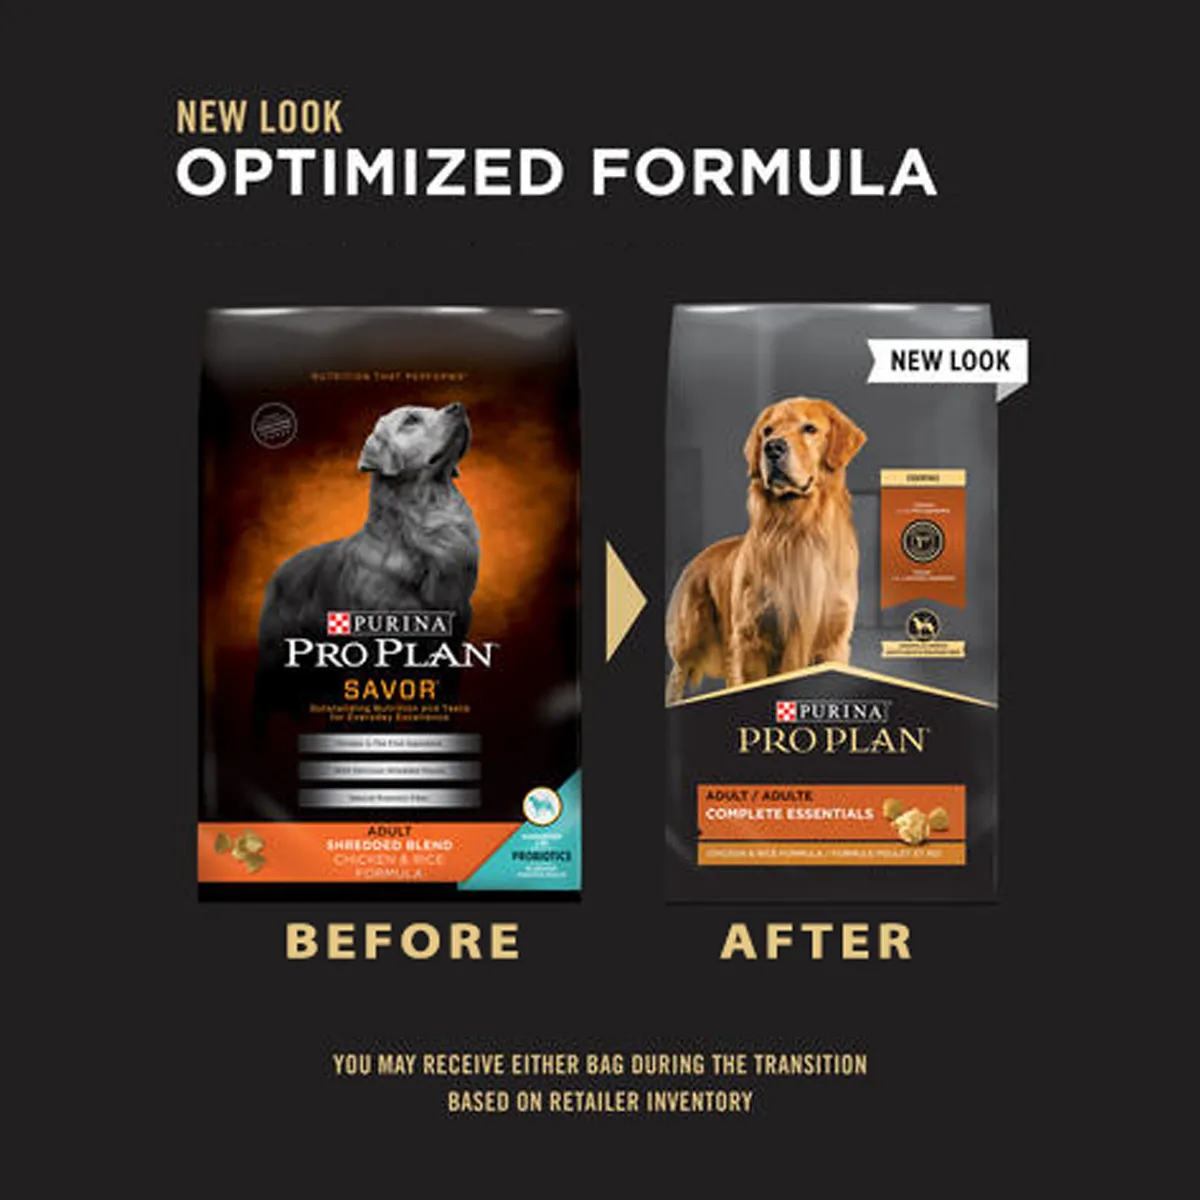 pro-plan-new-look-dogs-adult-complete-essentials-shredded-blend-chicken-rice-formula